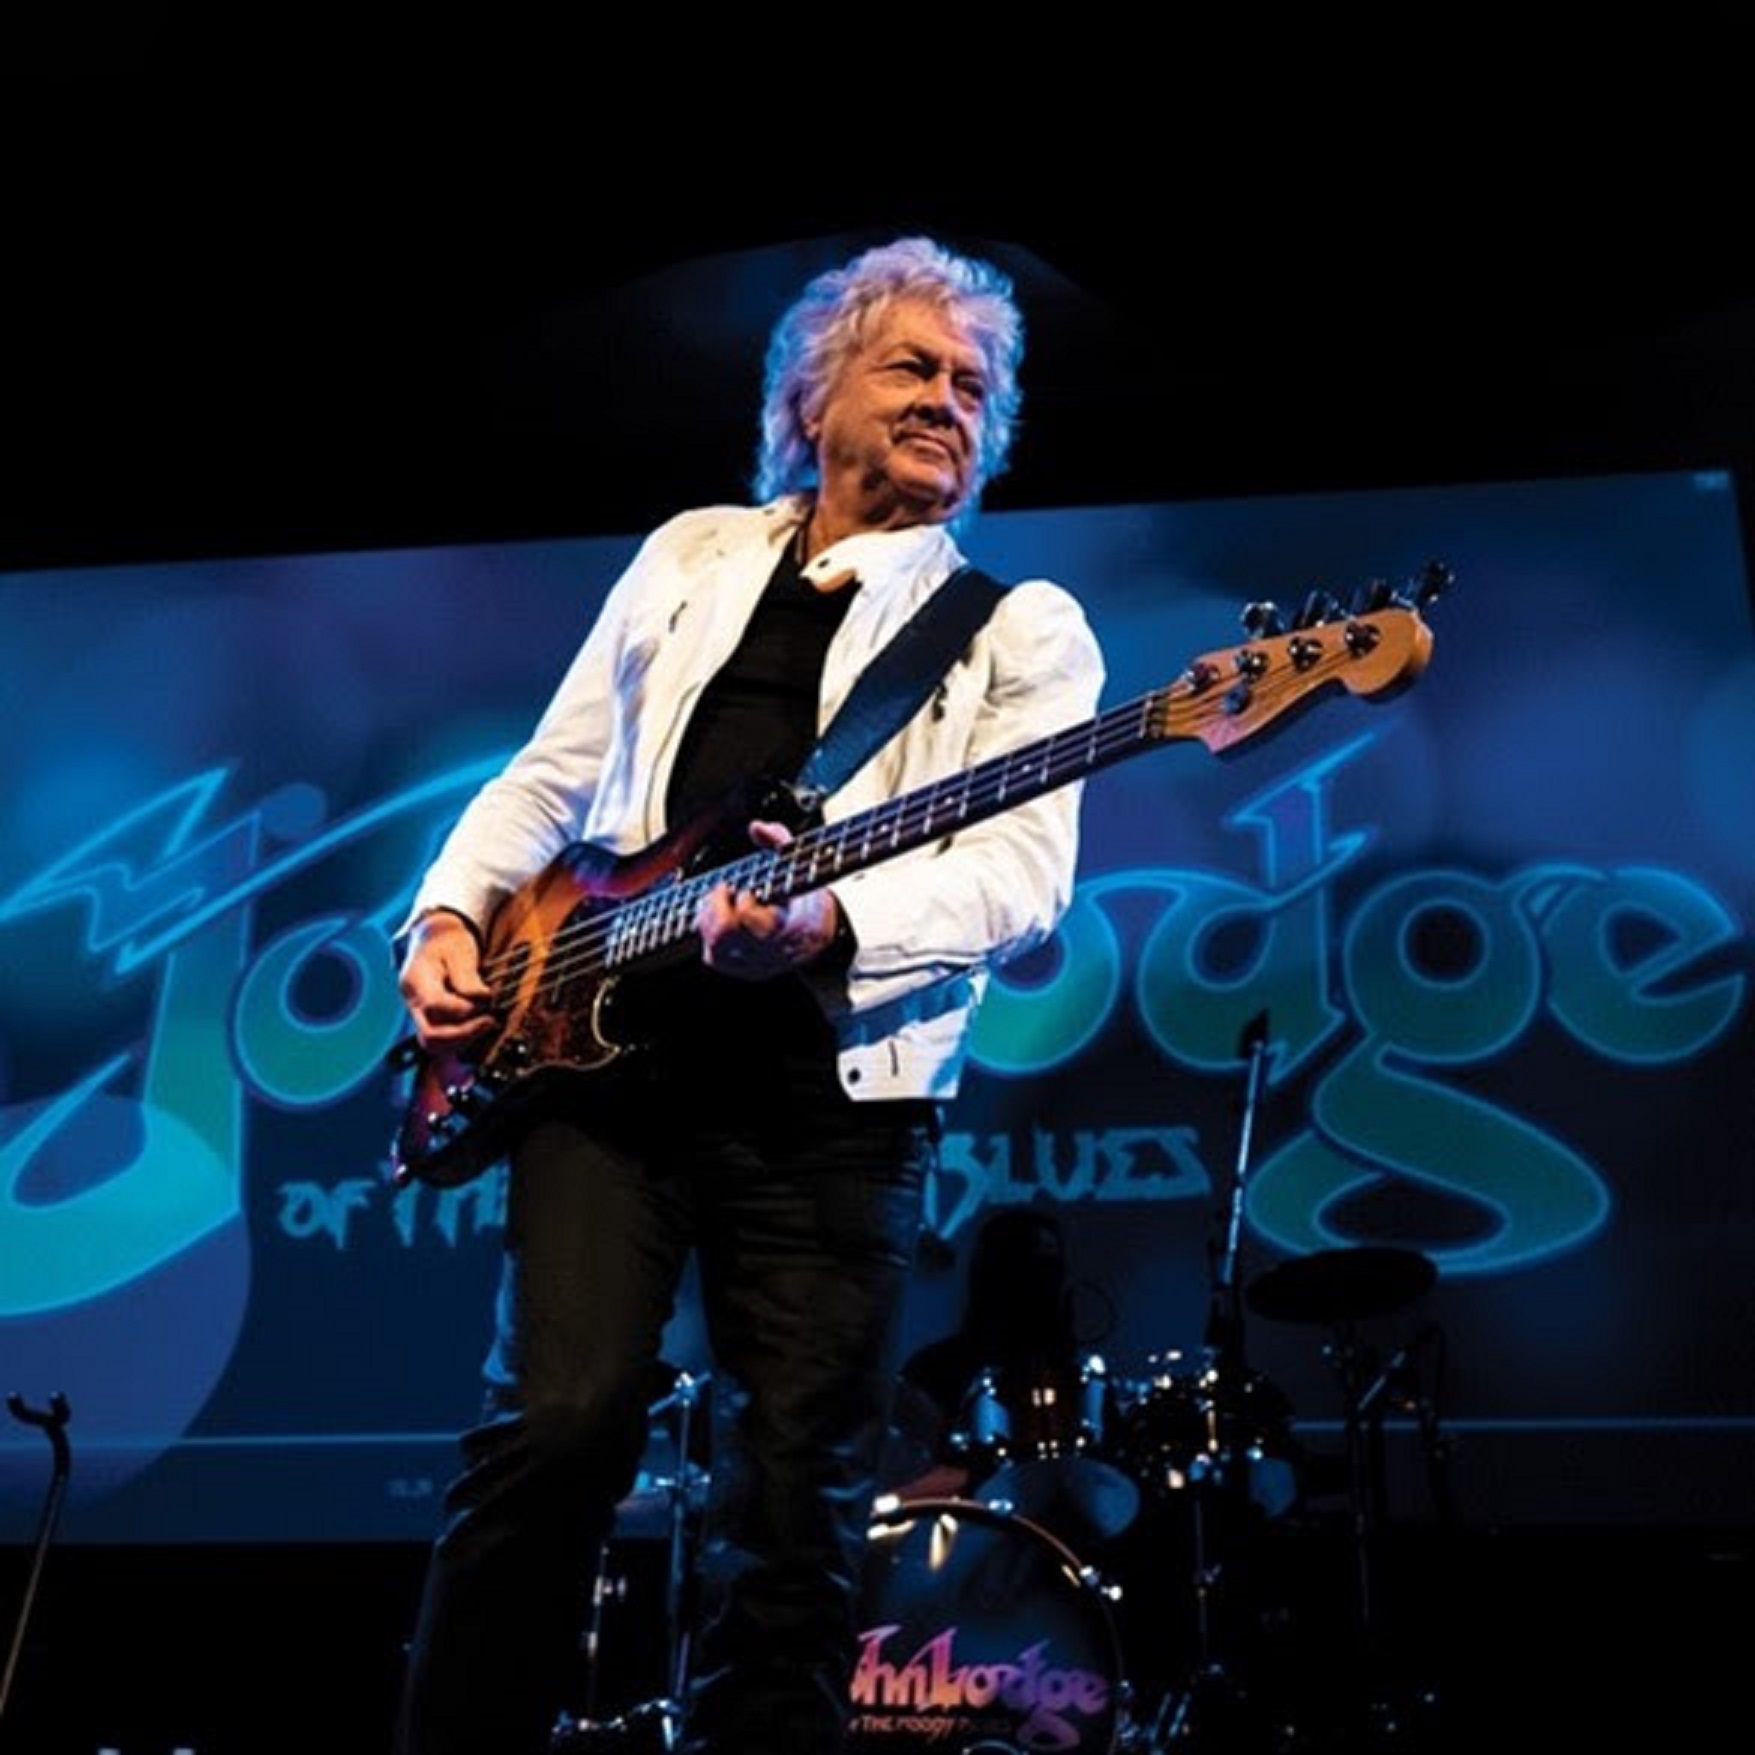 John Lodge’s Winter US Tour Kicks Off February 17 Encompassing Songs From The Moody Blues ‘ Days of Future Passed’ and ‘Seventh Sojourn’ Albums